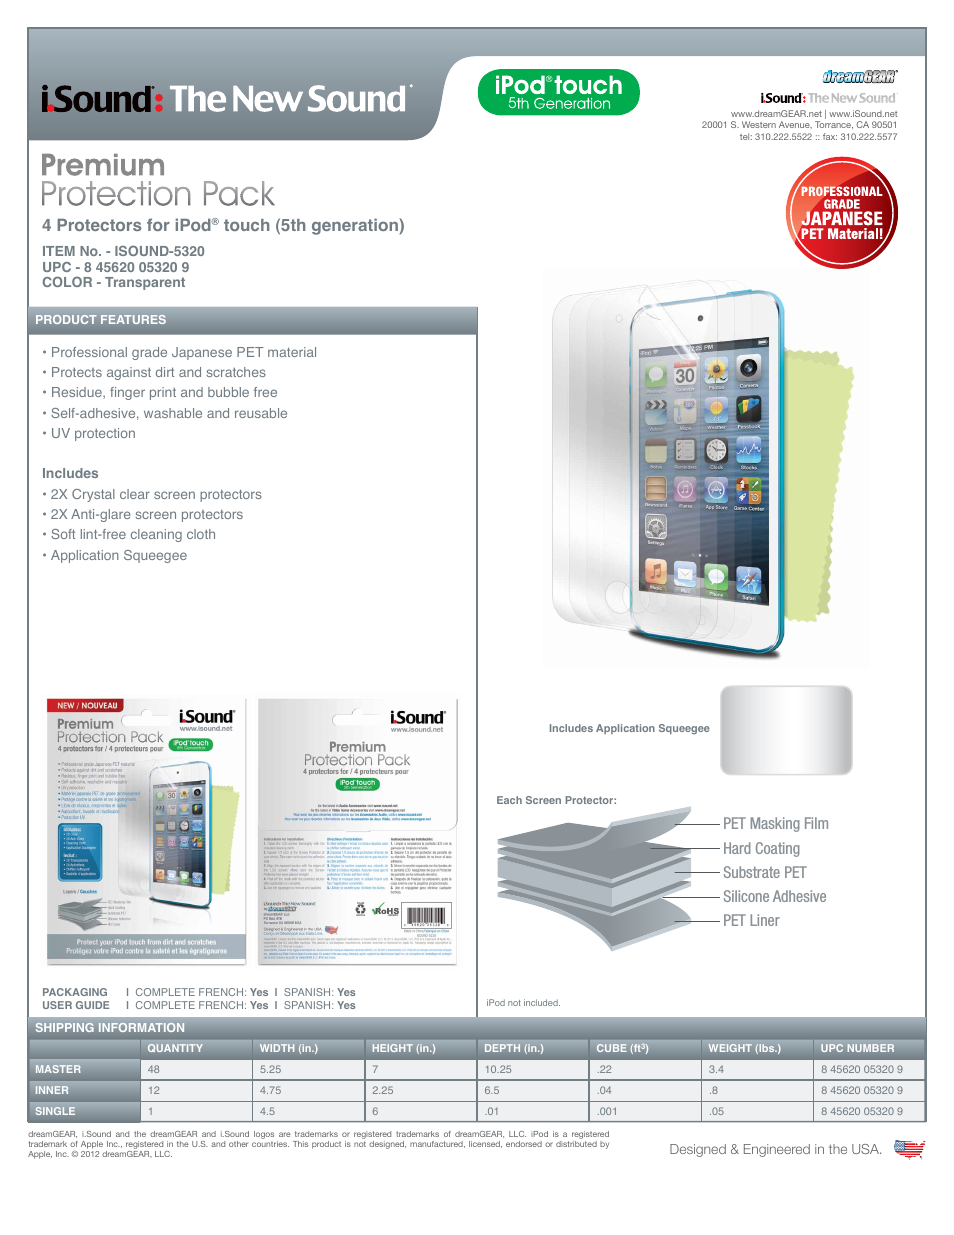 Premium Protection Pack for iPodtouch (5th gen) - Sell Sheet